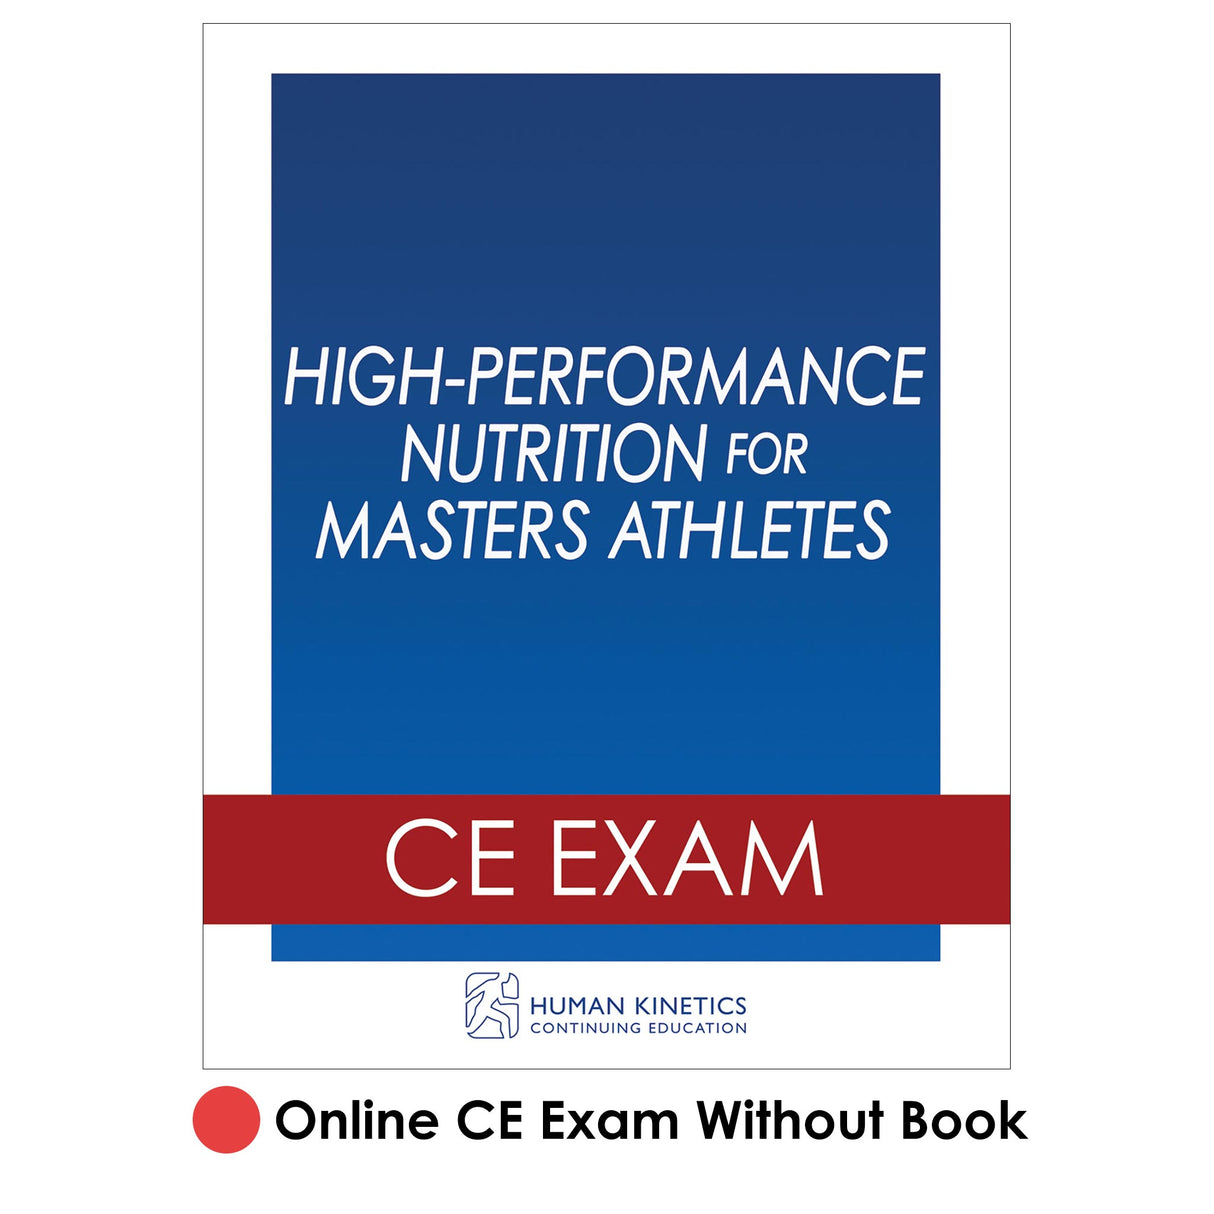 High-Performance Nutrition for Masters Athletes Online CE Exam Without Book